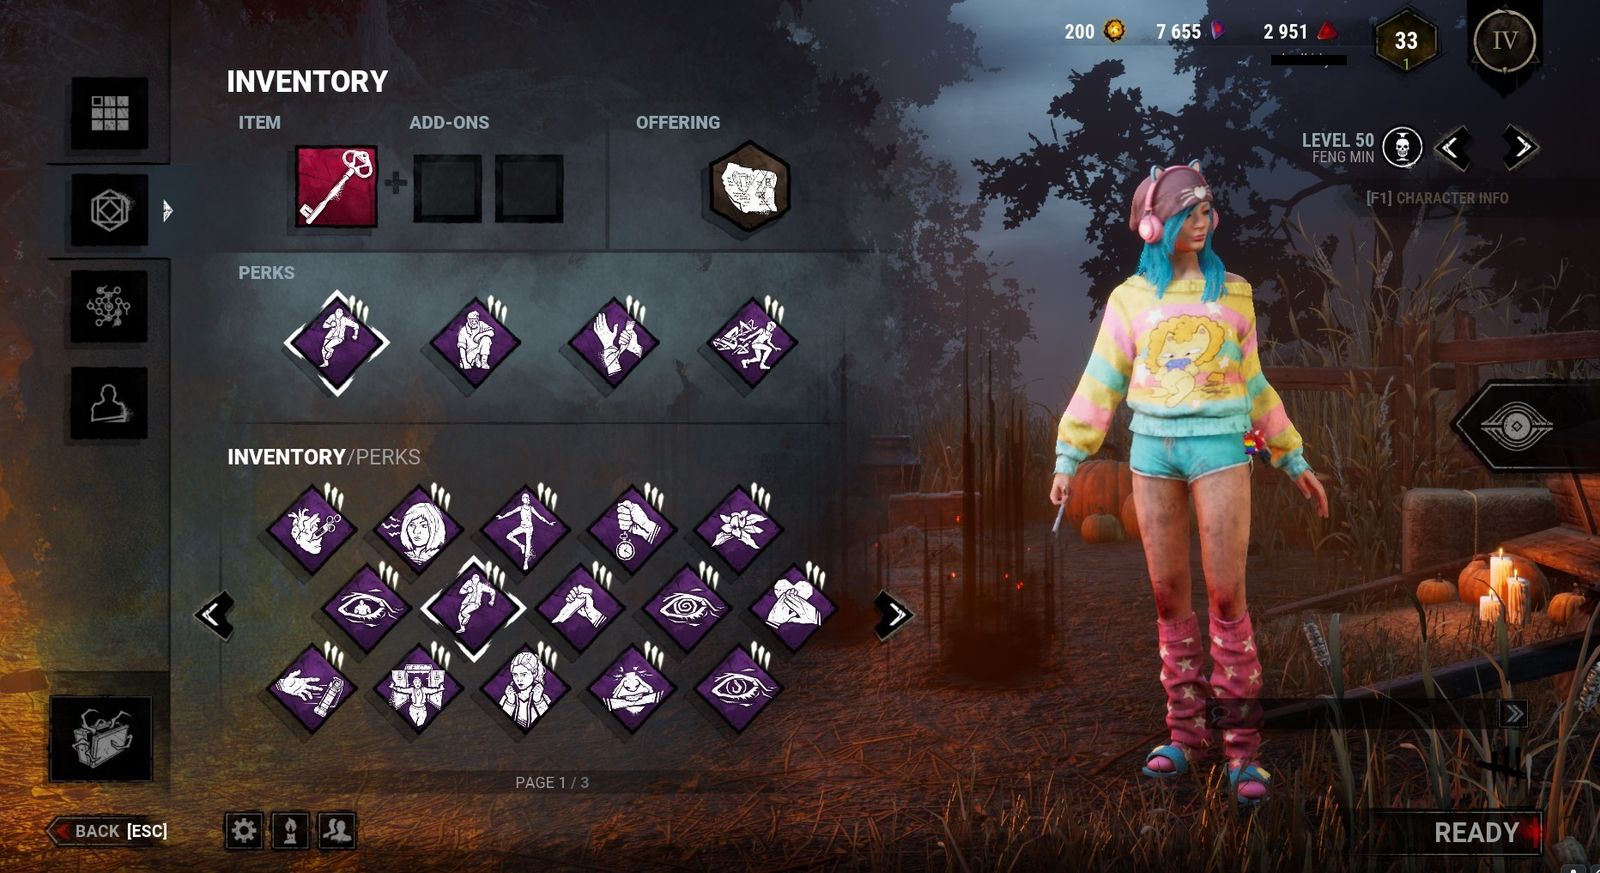 A survivor loadout in Dead by Daylight for trying to get a Hatch escape.